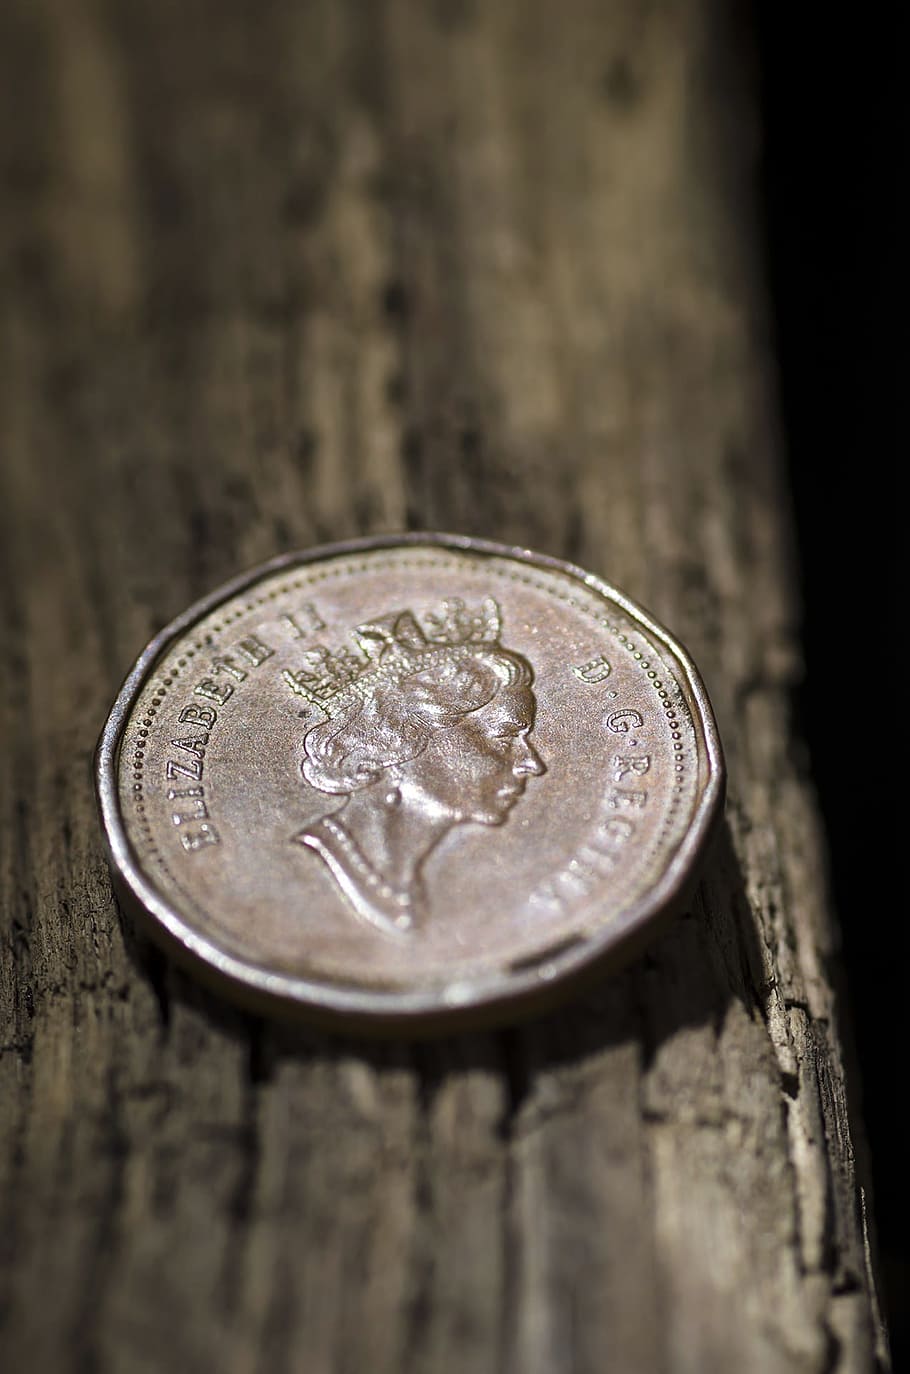 Coin, Gbp, Currency, Wood Grain, foreign, finance, wealth, close-up, selective focus, metal